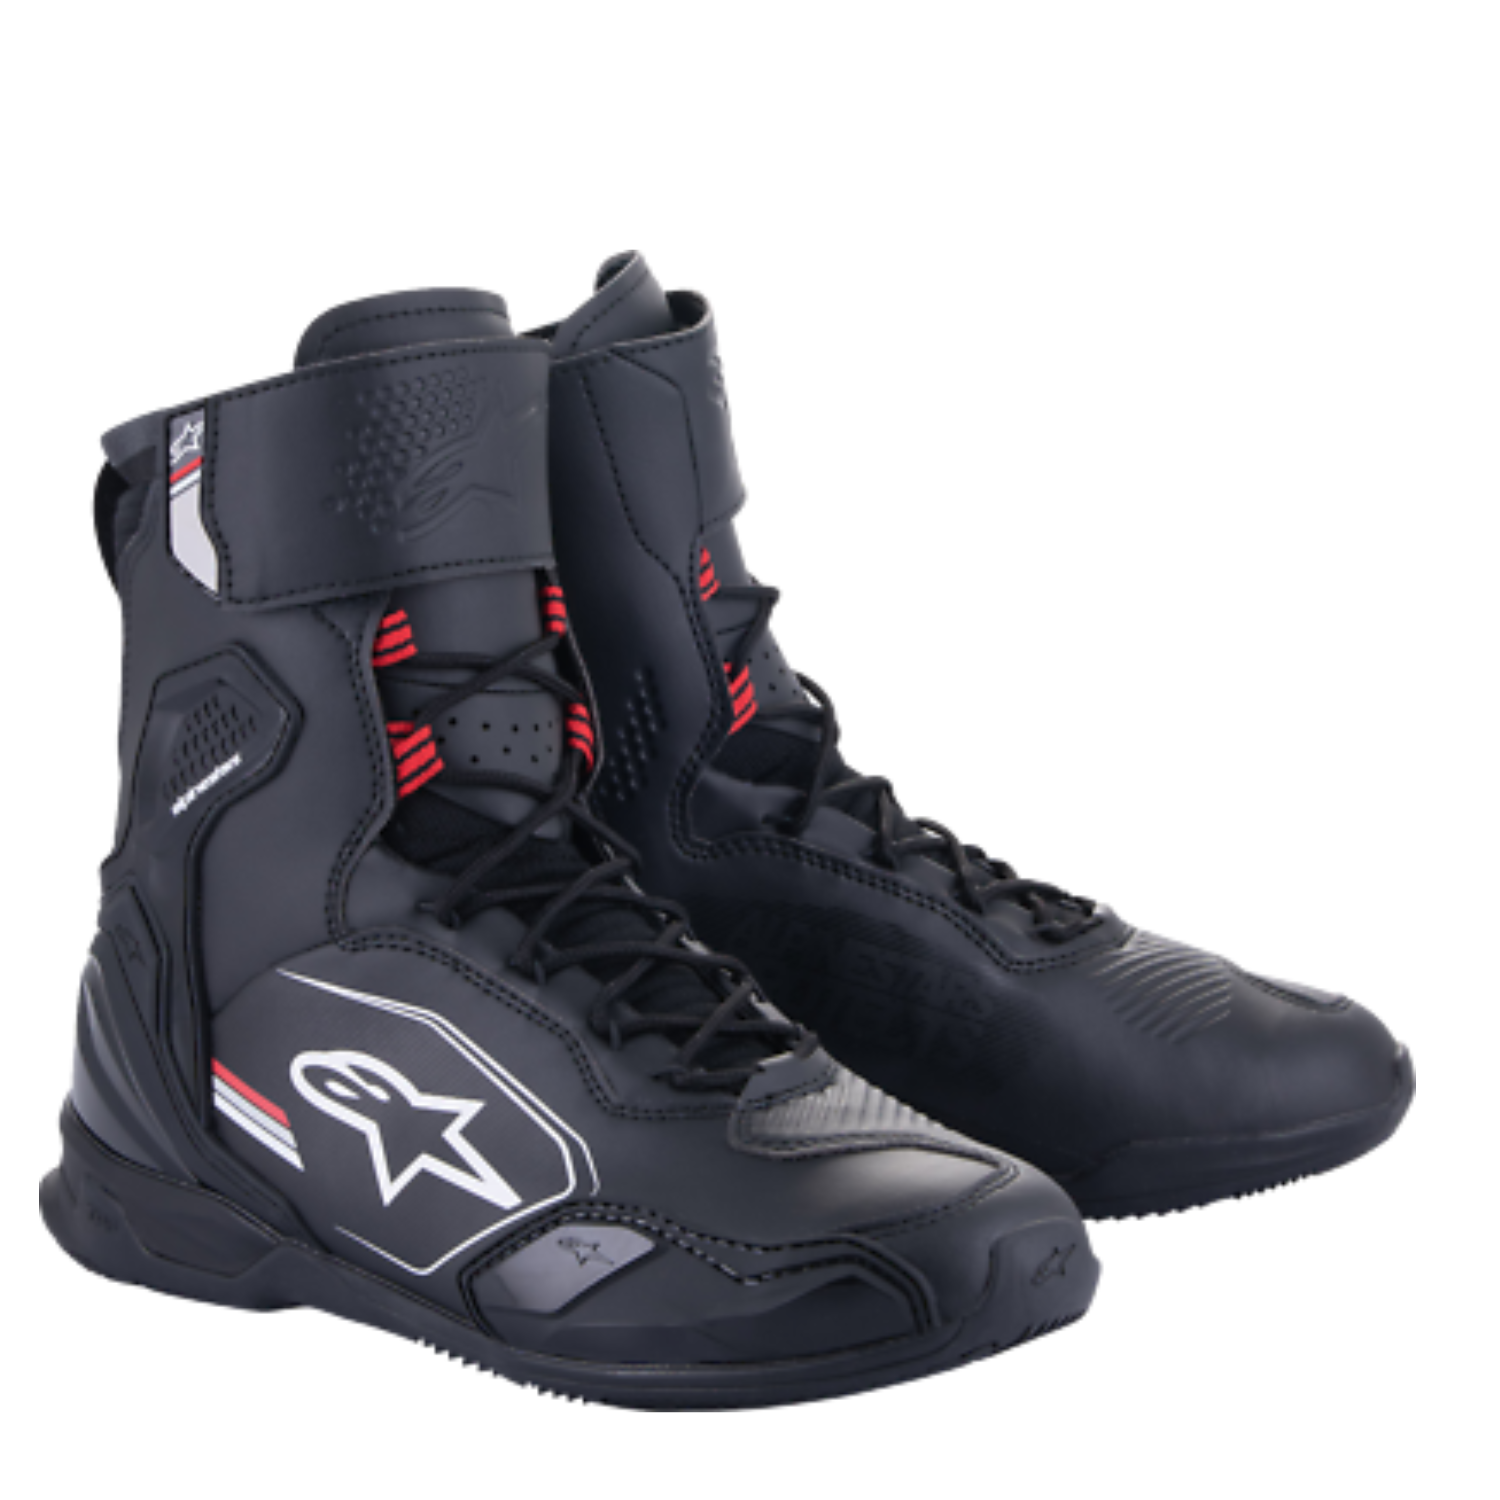 Image of EU Alpinestars Superfaster Shoes Black Gray Bright Red Taille US 65